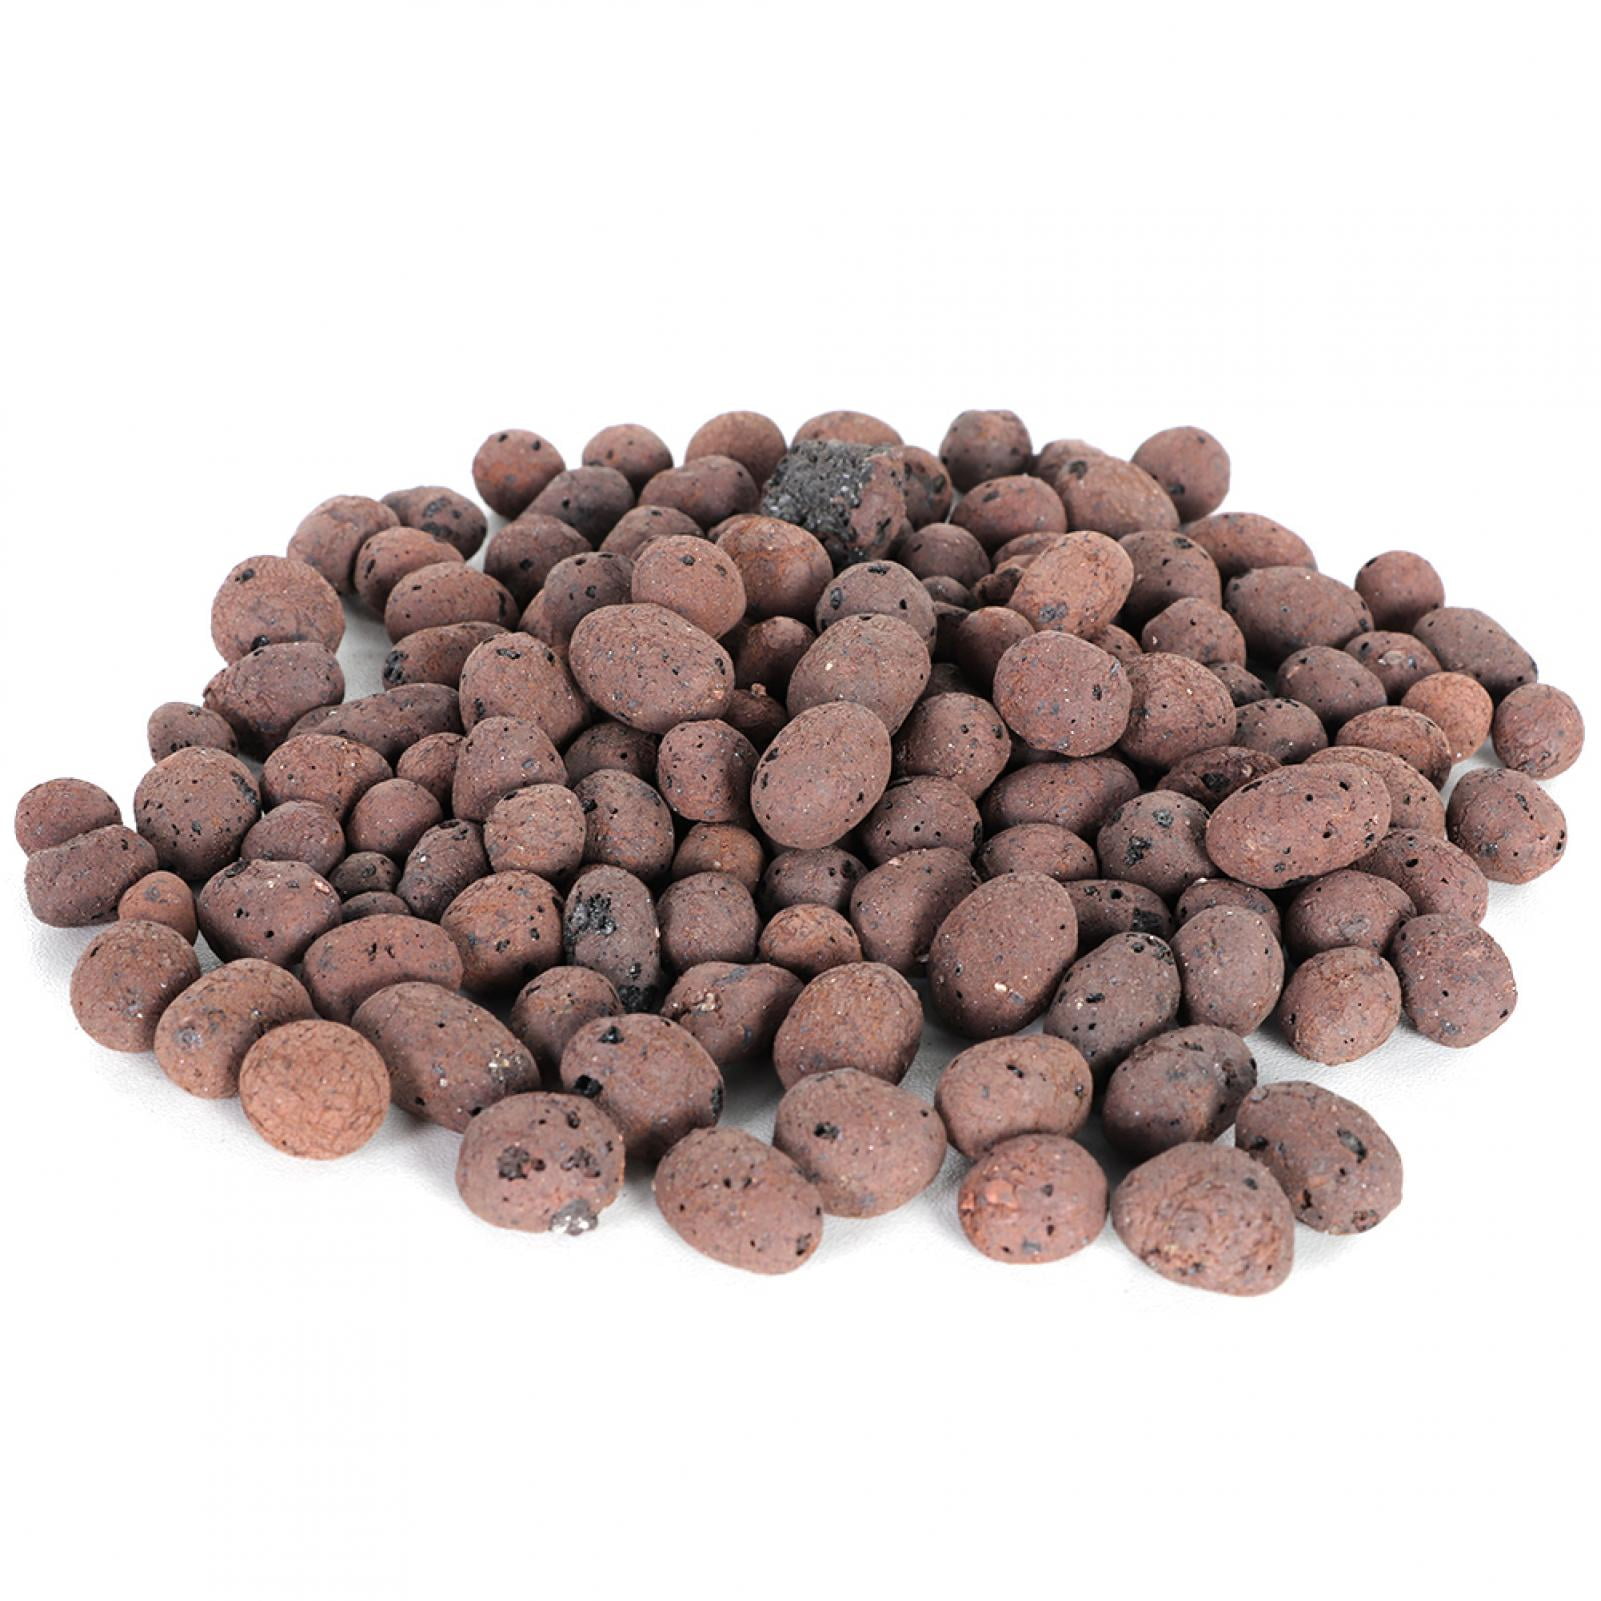 Sukh Clay Pebbles for Plants - 30OZ Pebbles for Indoor Plants Natural Clay,  Used for Drainage Decoration Aquaponics Hydroponics and Other Gardening